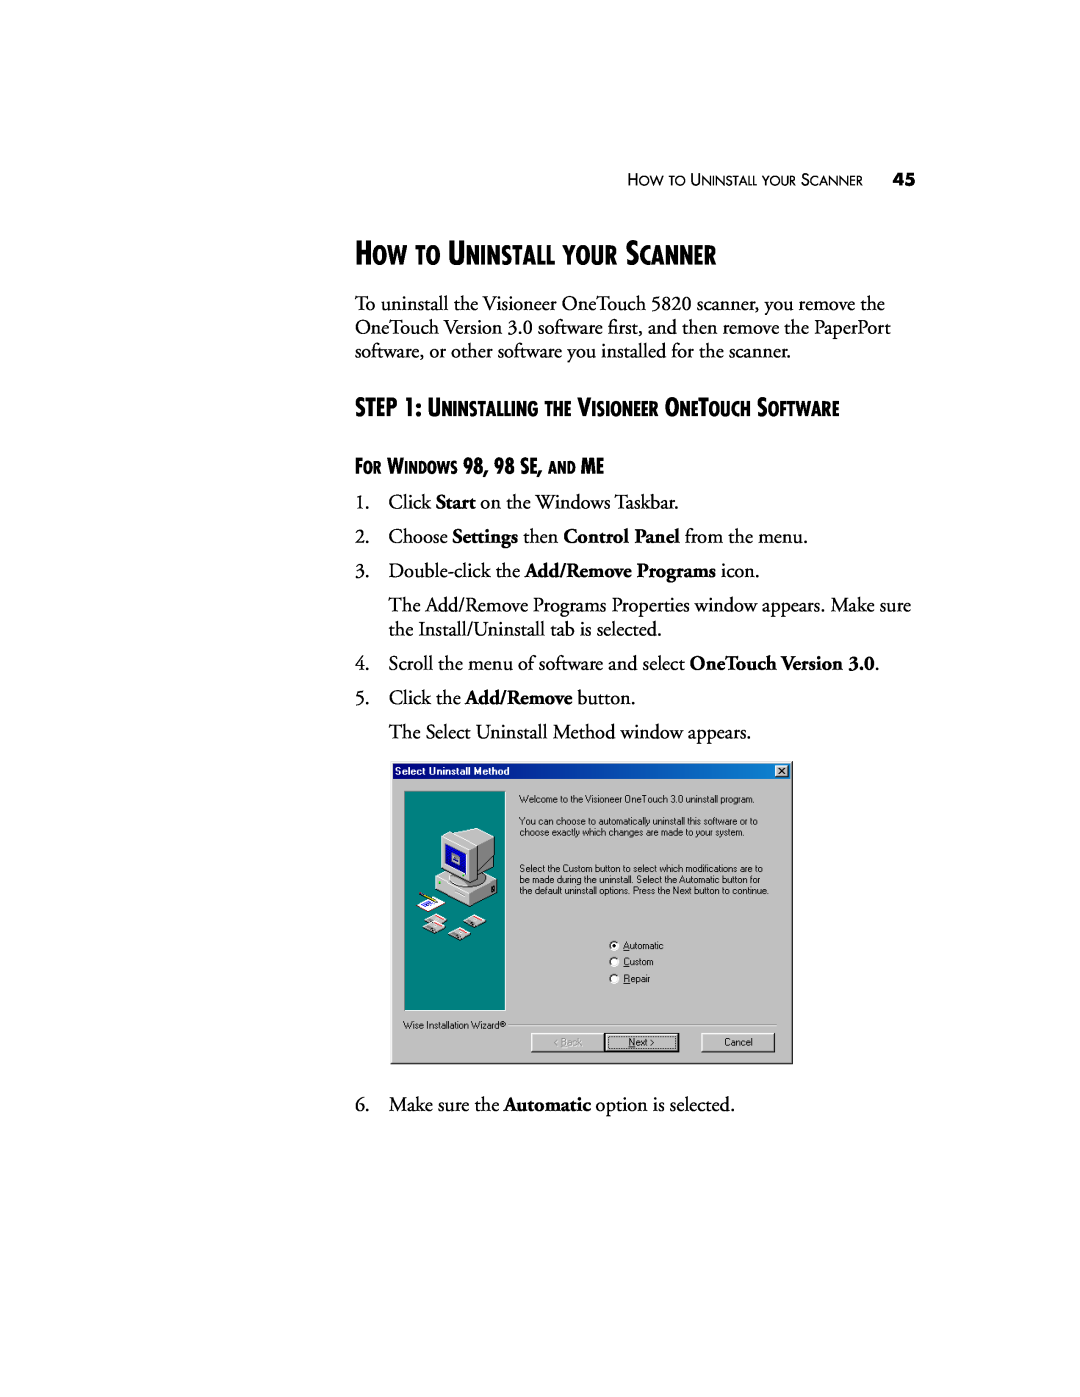 Visioneer 5820 manual How To Uninstall Your Scanner, FOR WINDOWS 98, 98 SE, AND ME 